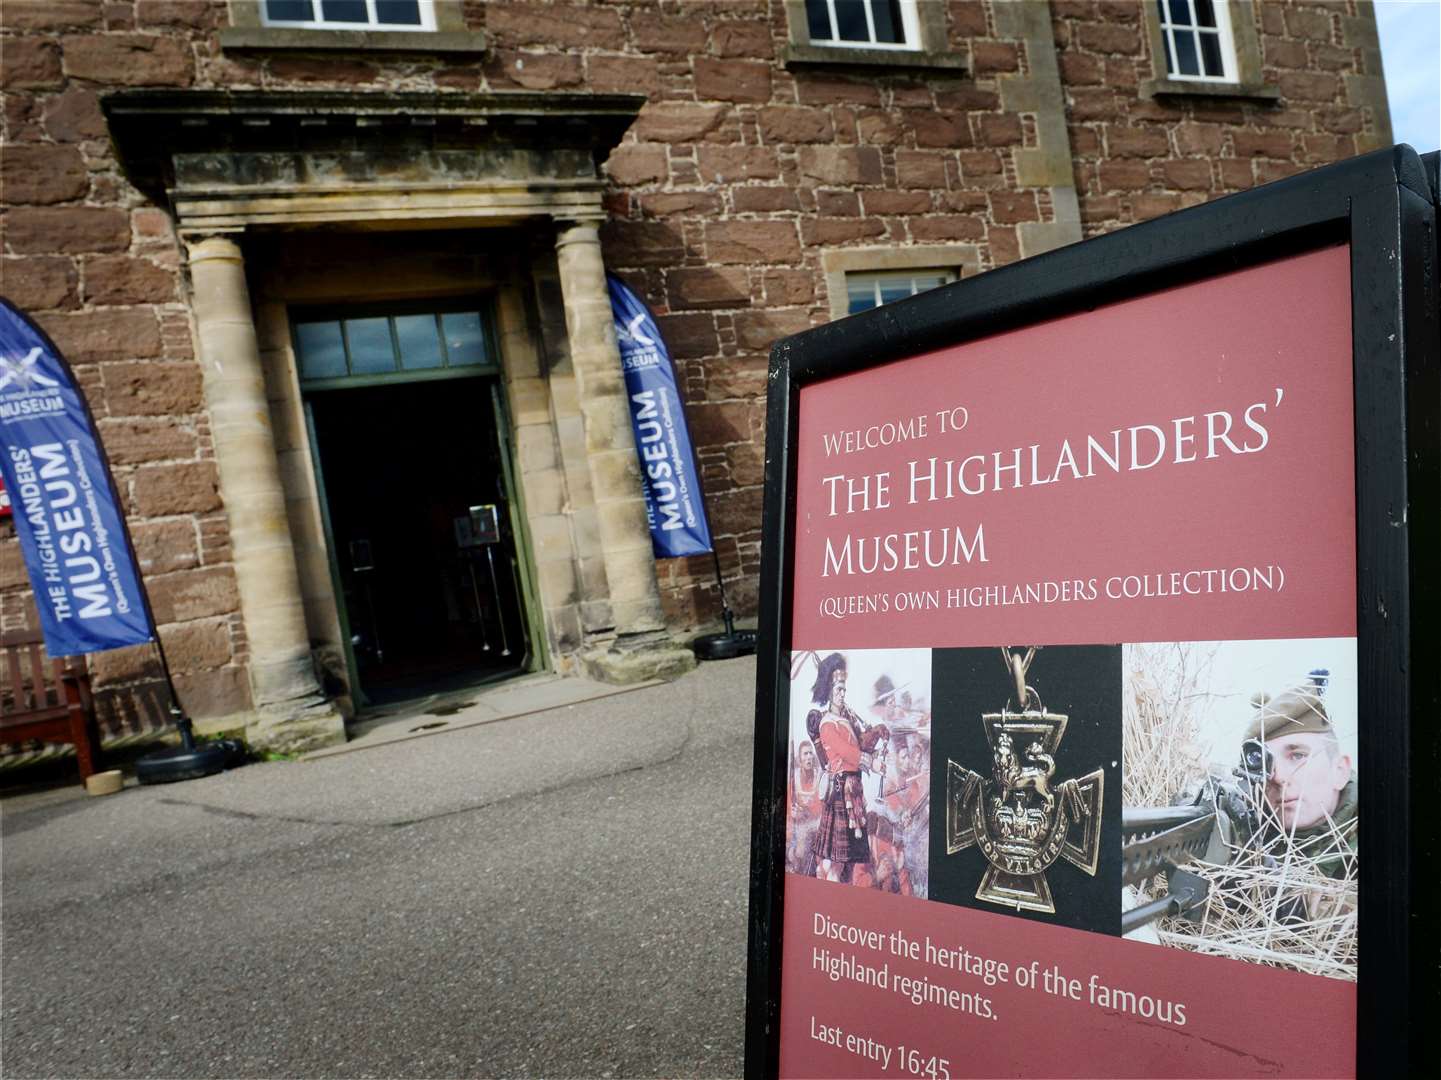 An auction will be held to benefit the Highlanders' Museum at Fort George.